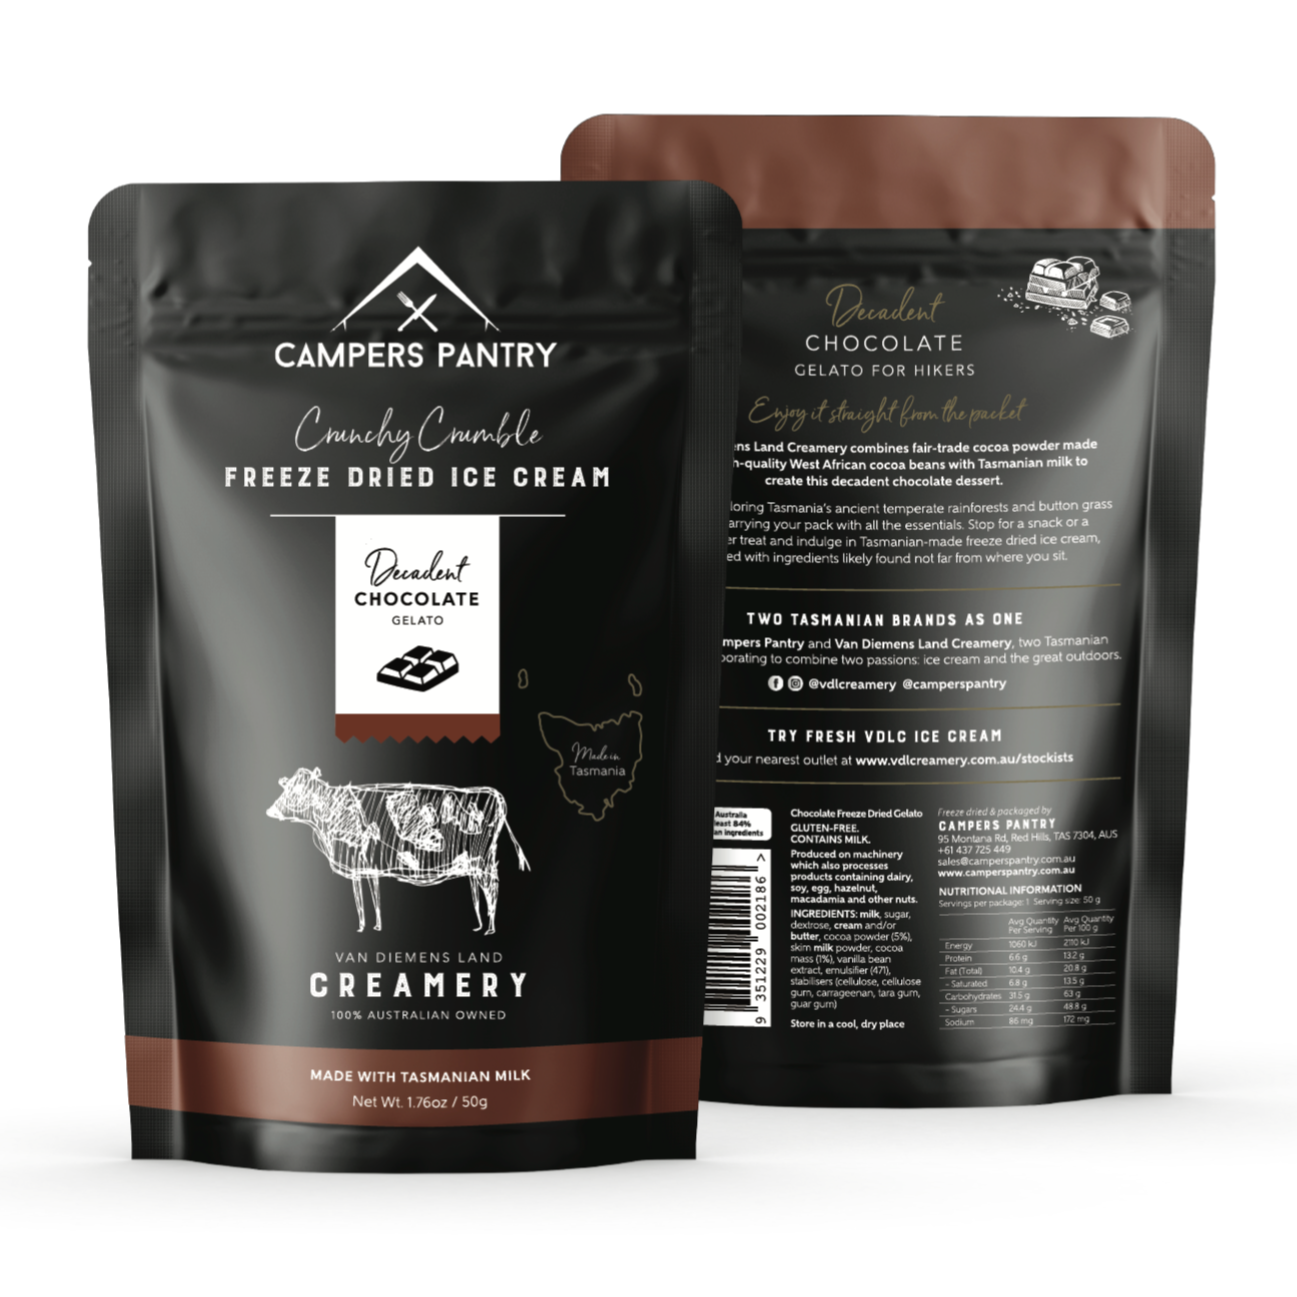 Campers Pantry Freeze Dried Chocolate Gelato Ice Cream - 50g